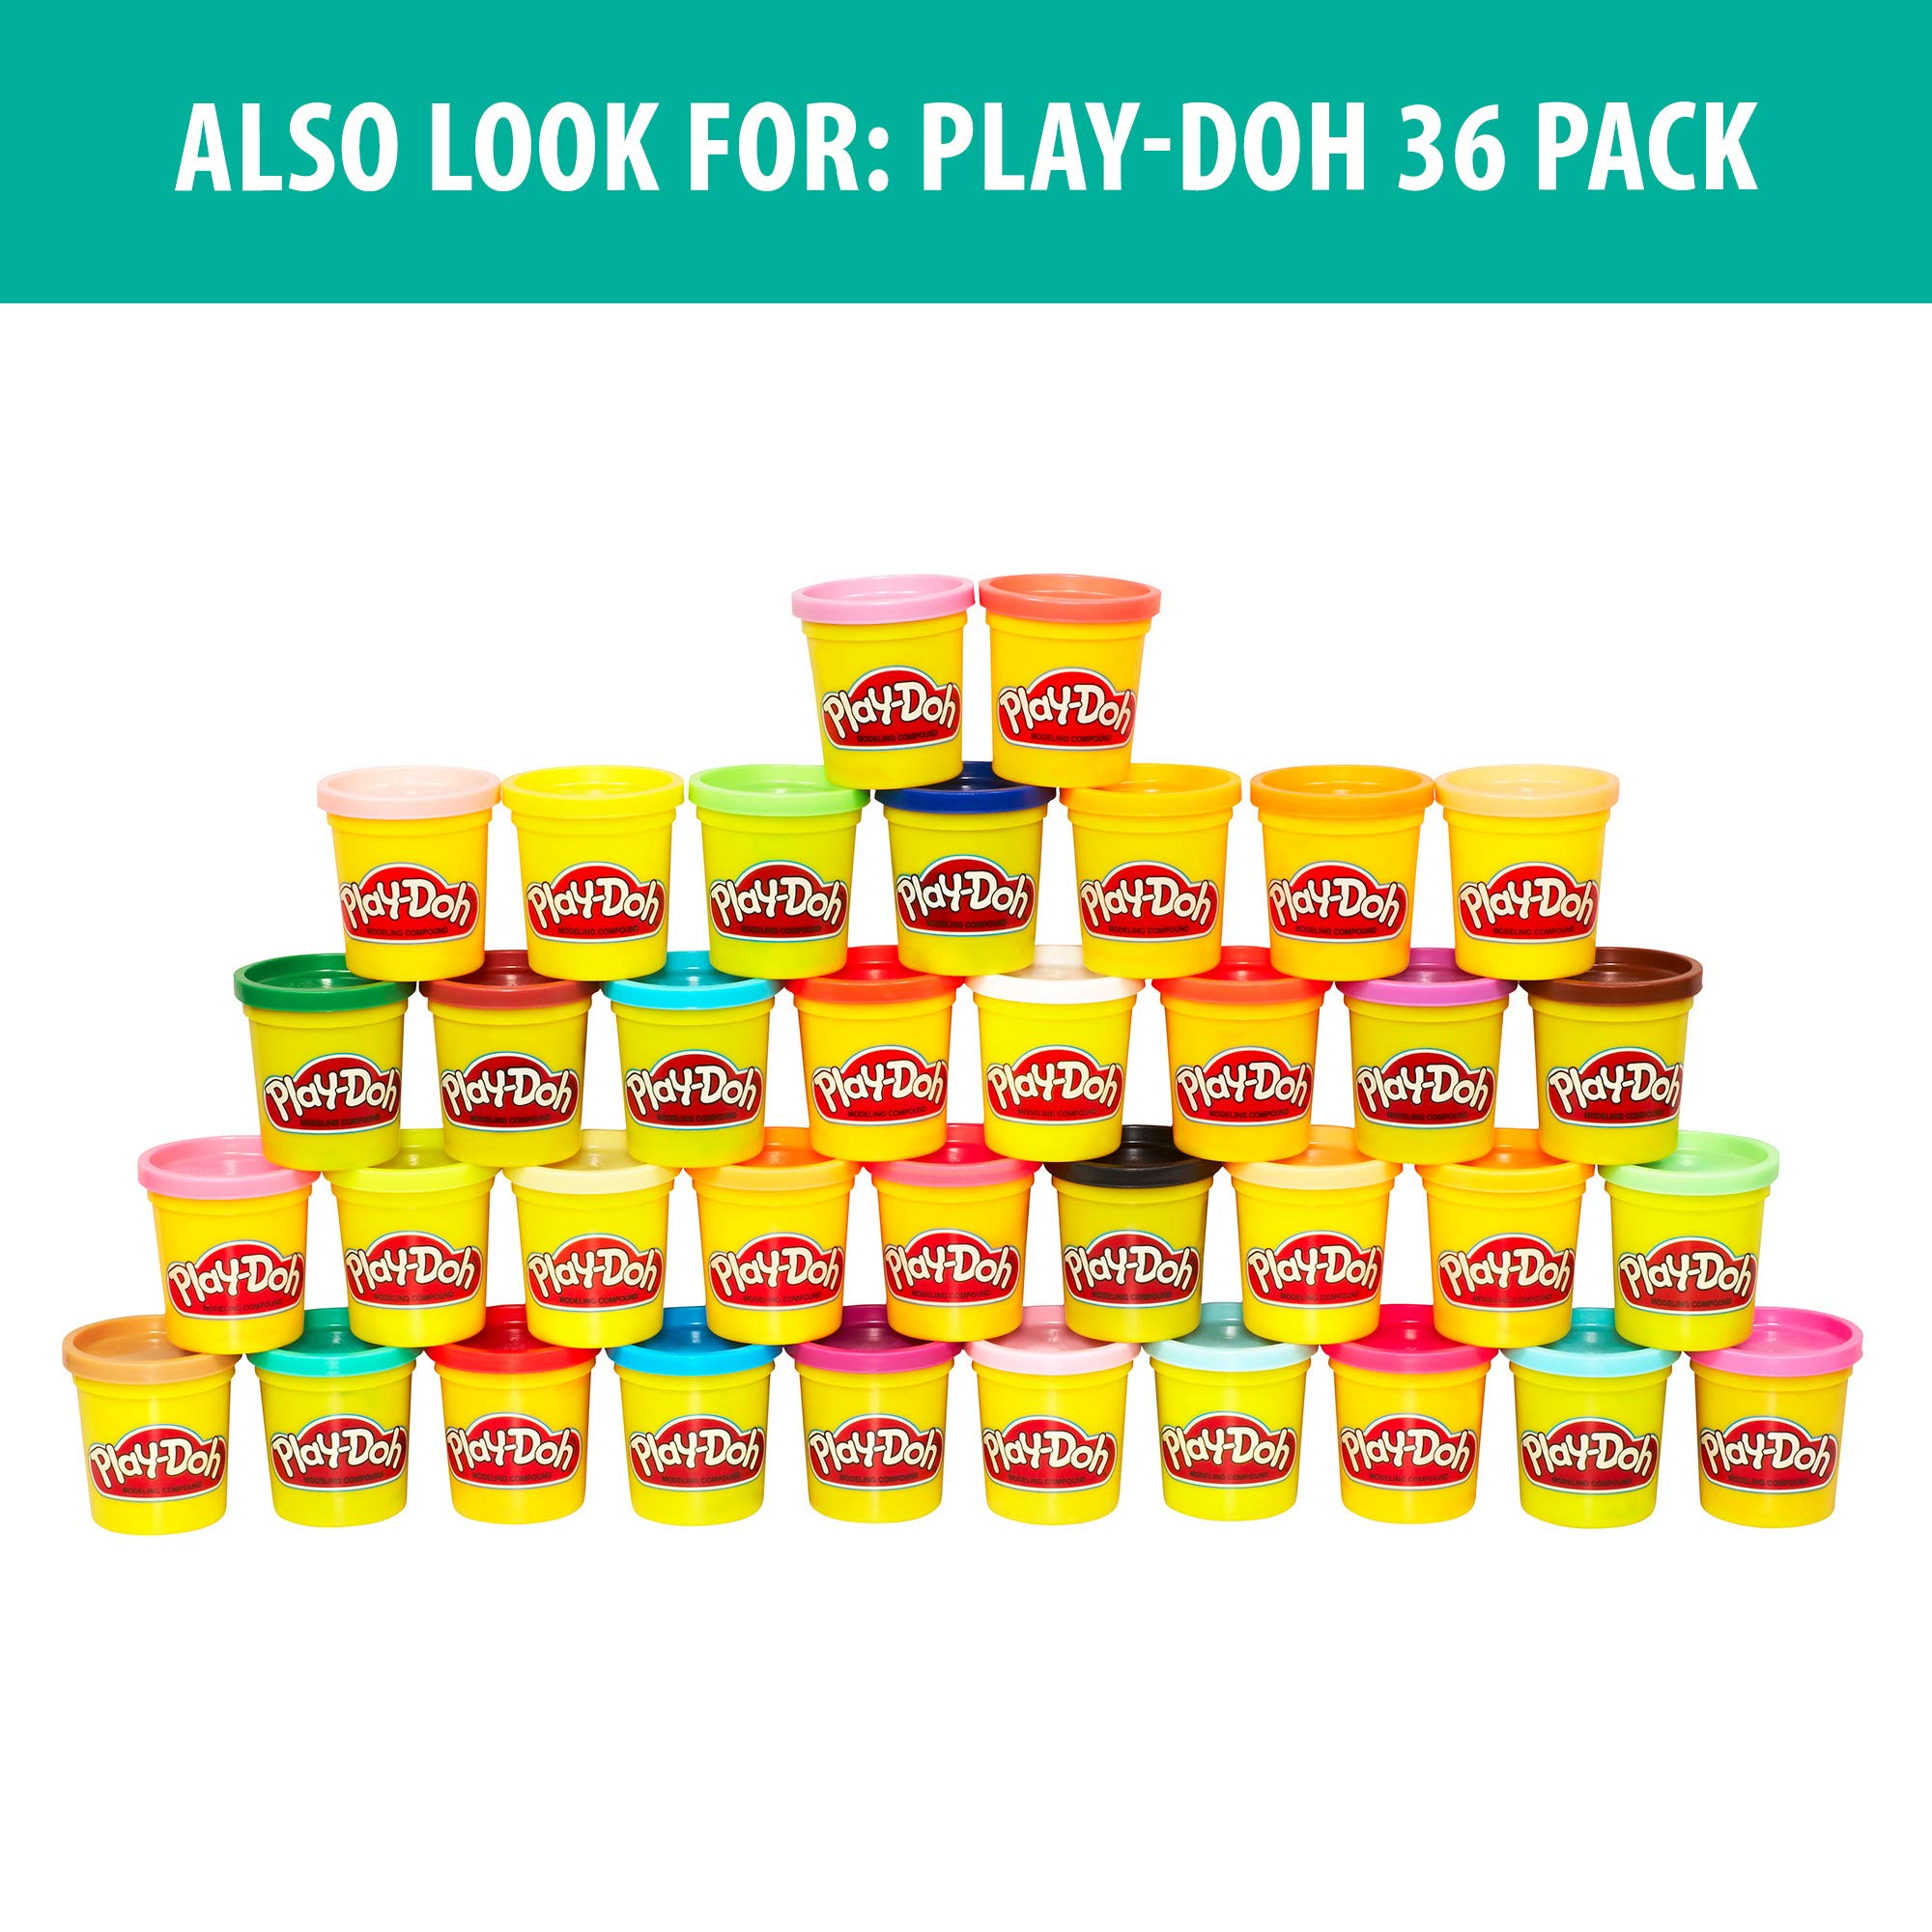 Play-Doh Play 'N Store Kids Table for Arts & Crafts Activities with 8 Non-Toxic Colors, 2 Oz Cans (Amazon Exclusive)